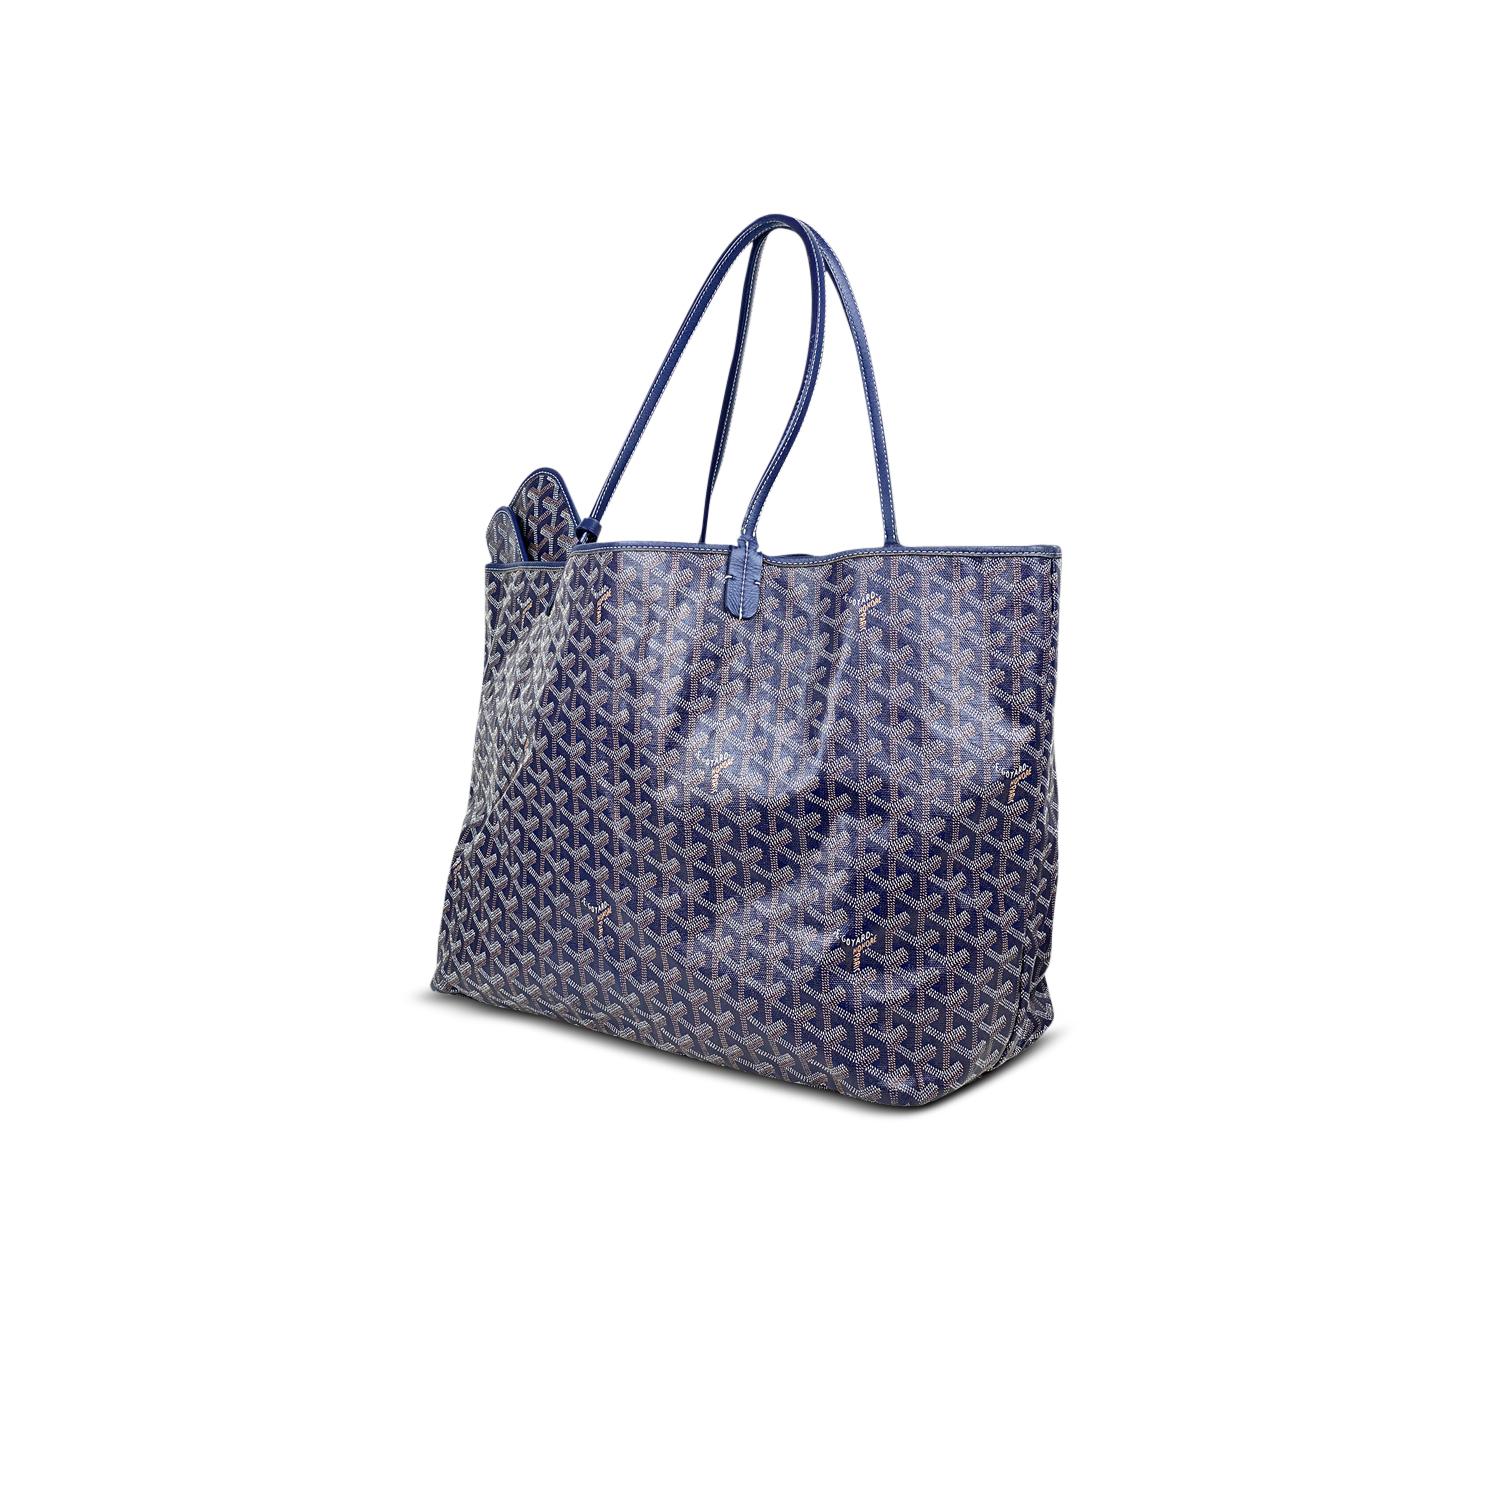 Blue and multicolor stenciled Goyardine coated canvas Goyard St. Louis GM

- Palladium-plated hardware
- Black leather trim
- Dual flat shoulder straps, beige canvas lining and open top

Overall Preloved Condition: Good
Exterior Condition: Good.